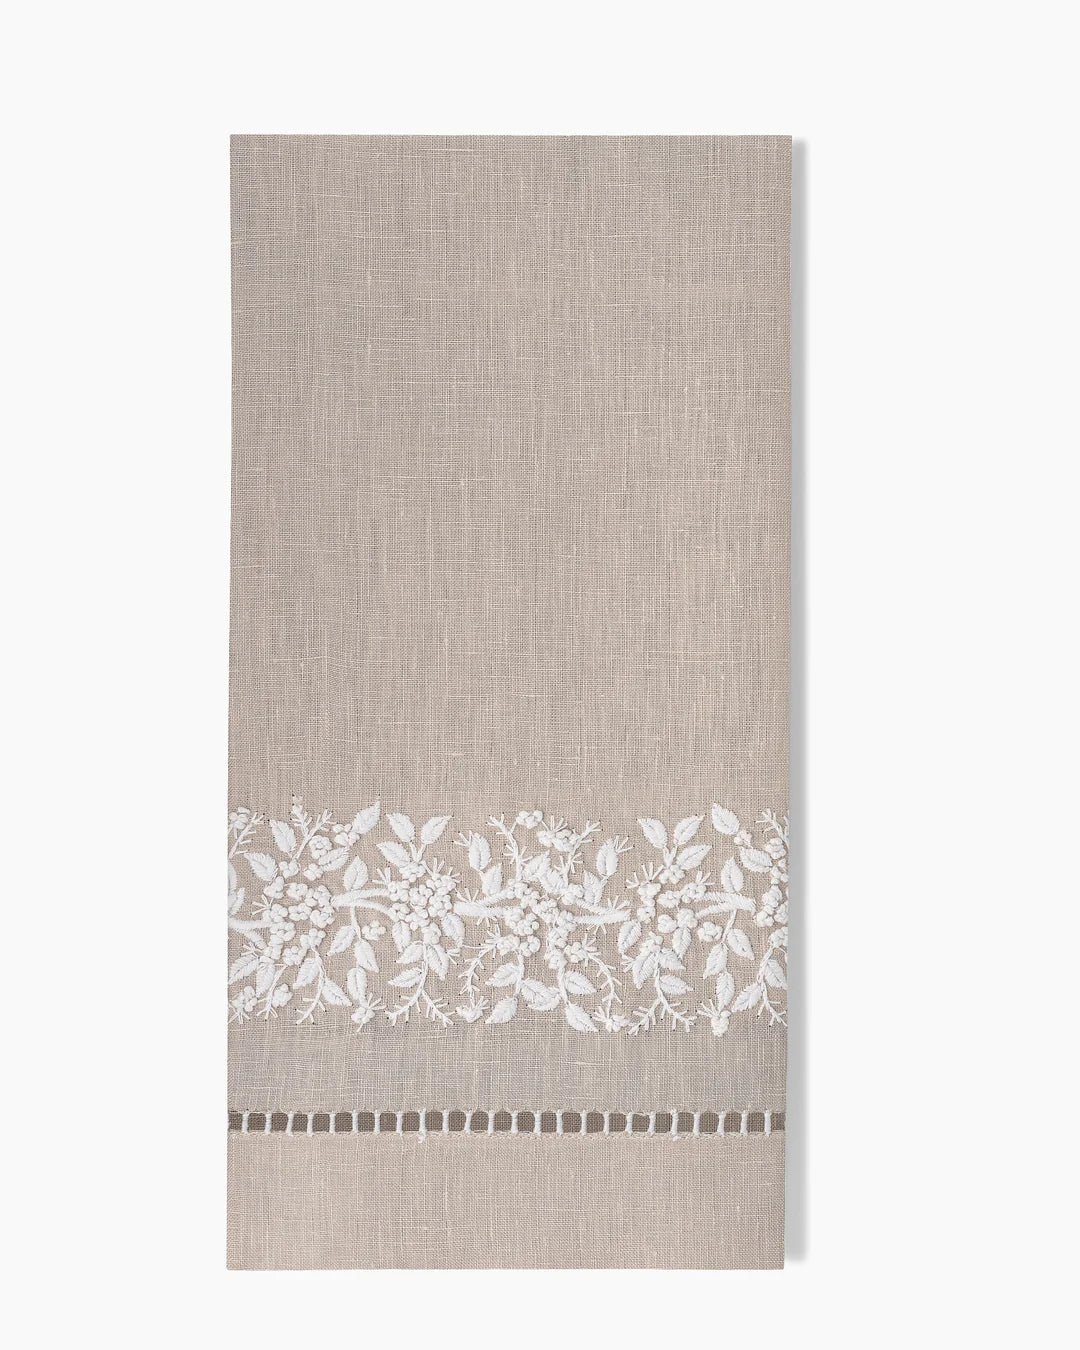 Jardin Classic Linen Hand Towels in Taupe, Set of Two